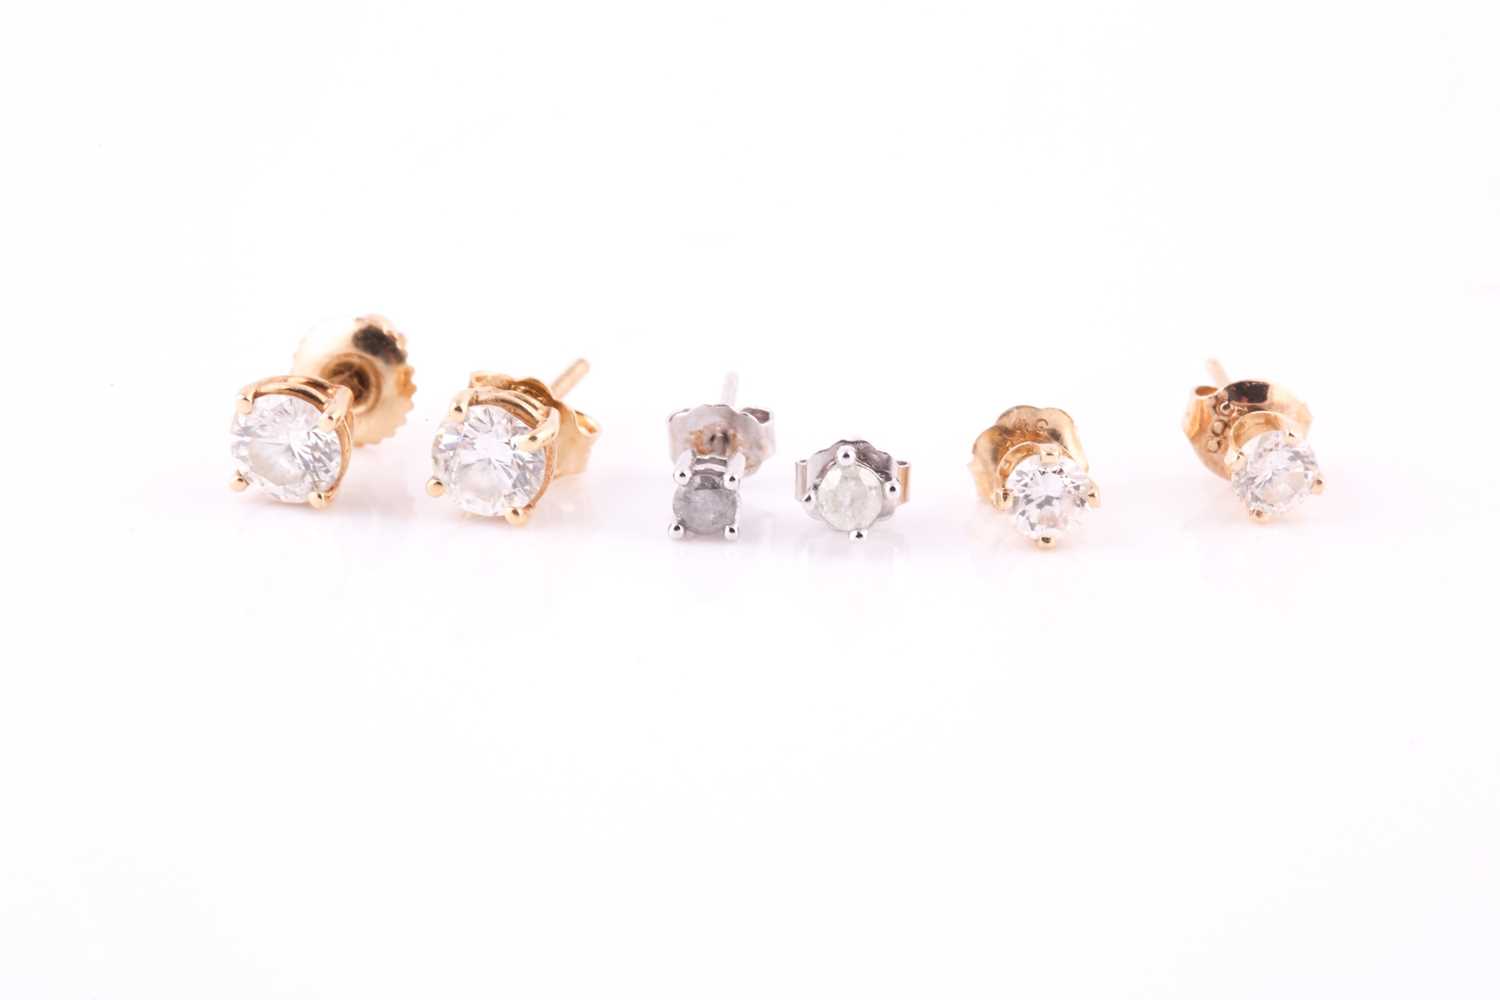 Three pairs of diamond ear studs, the largest pair estimated total diamond weight 0.9 carats, 2.7